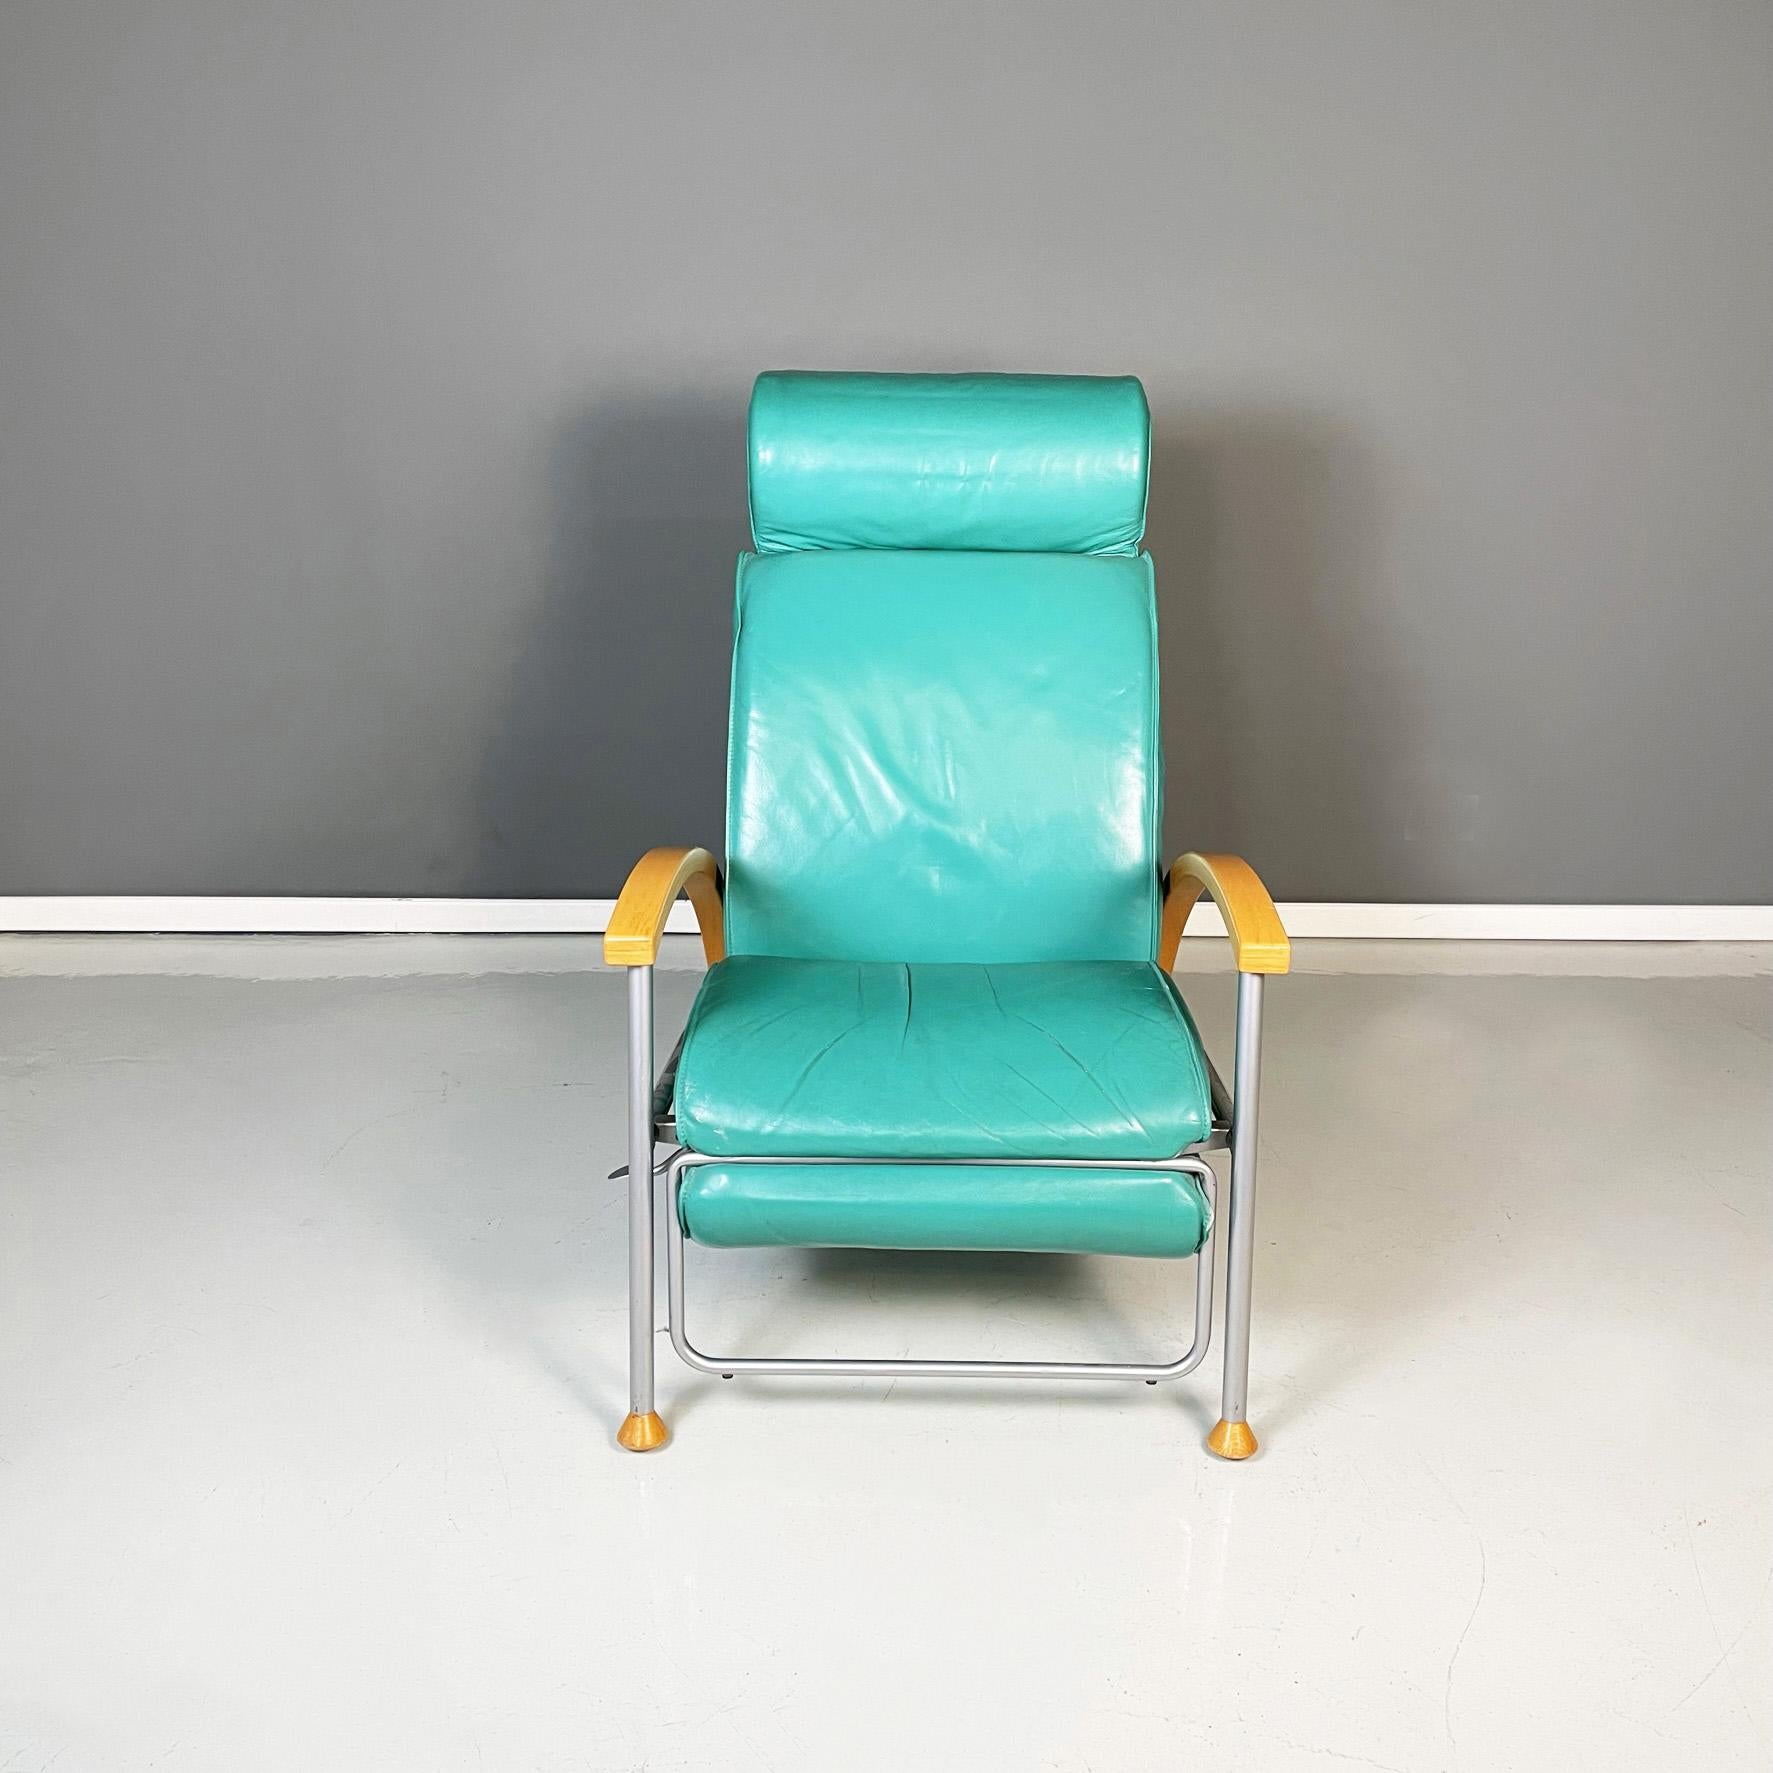 Italian Modern Armchair in Aqua-Green Leather, Wood and Metal, 1980s In Good Condition For Sale In MIlano, IT